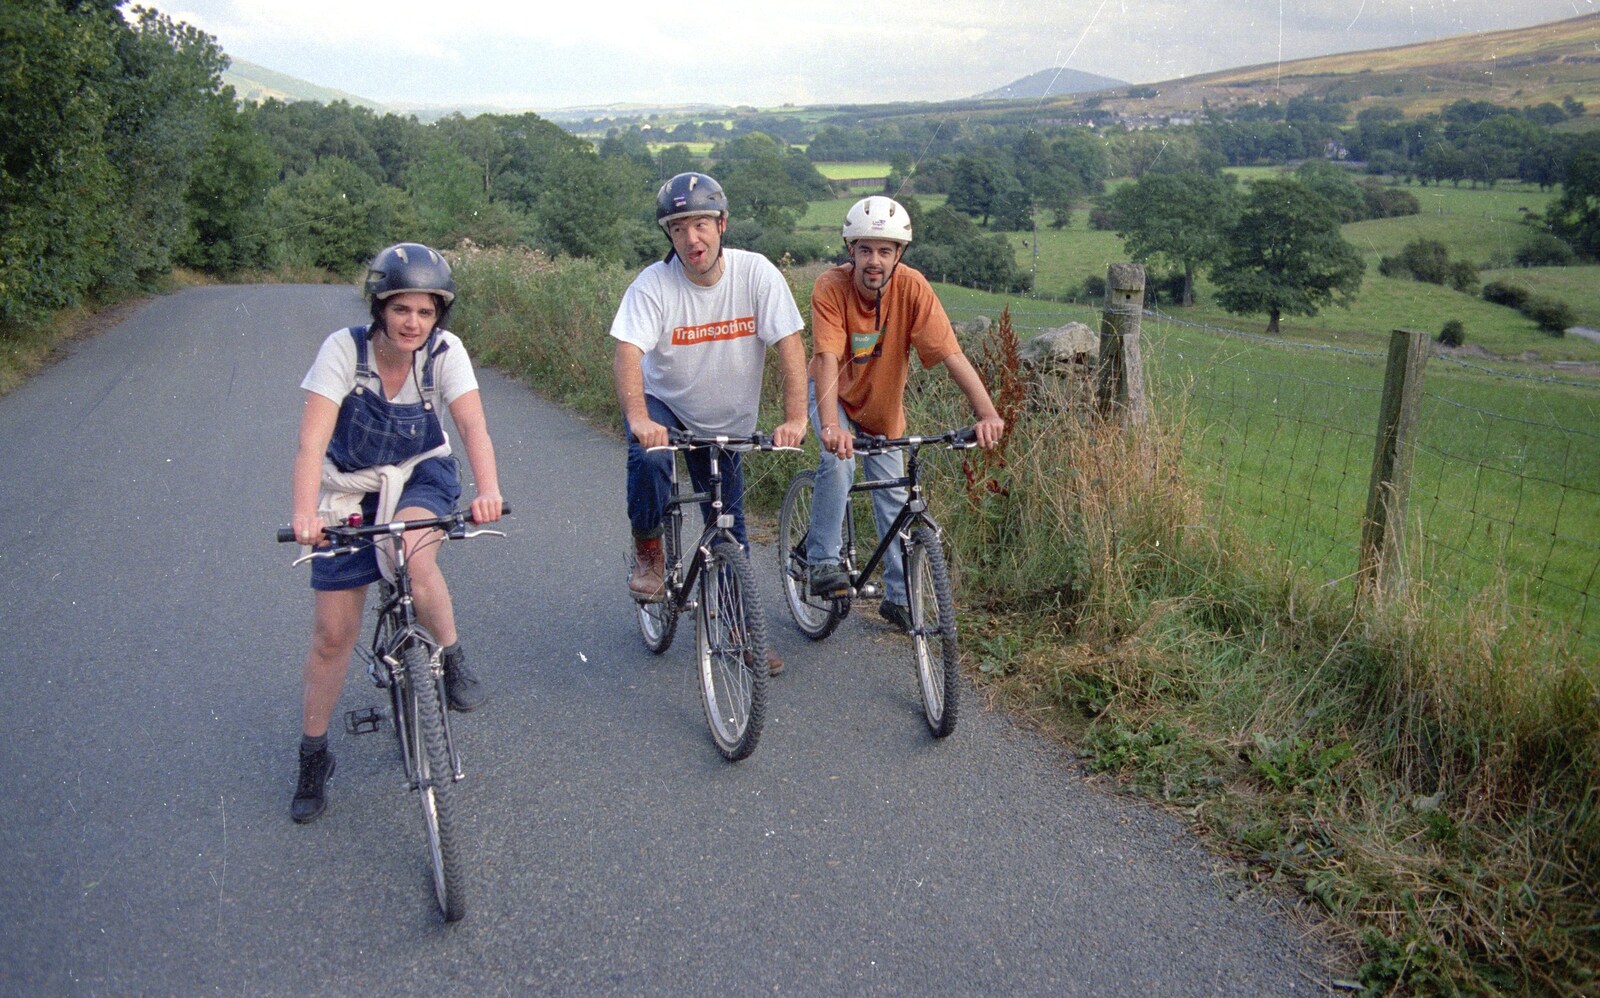 CISU Hang Around Keswick and The Briars, Cumbria - 16th September 1996: Gail, Tim and Trev pause for breath at the top of a very steep hill